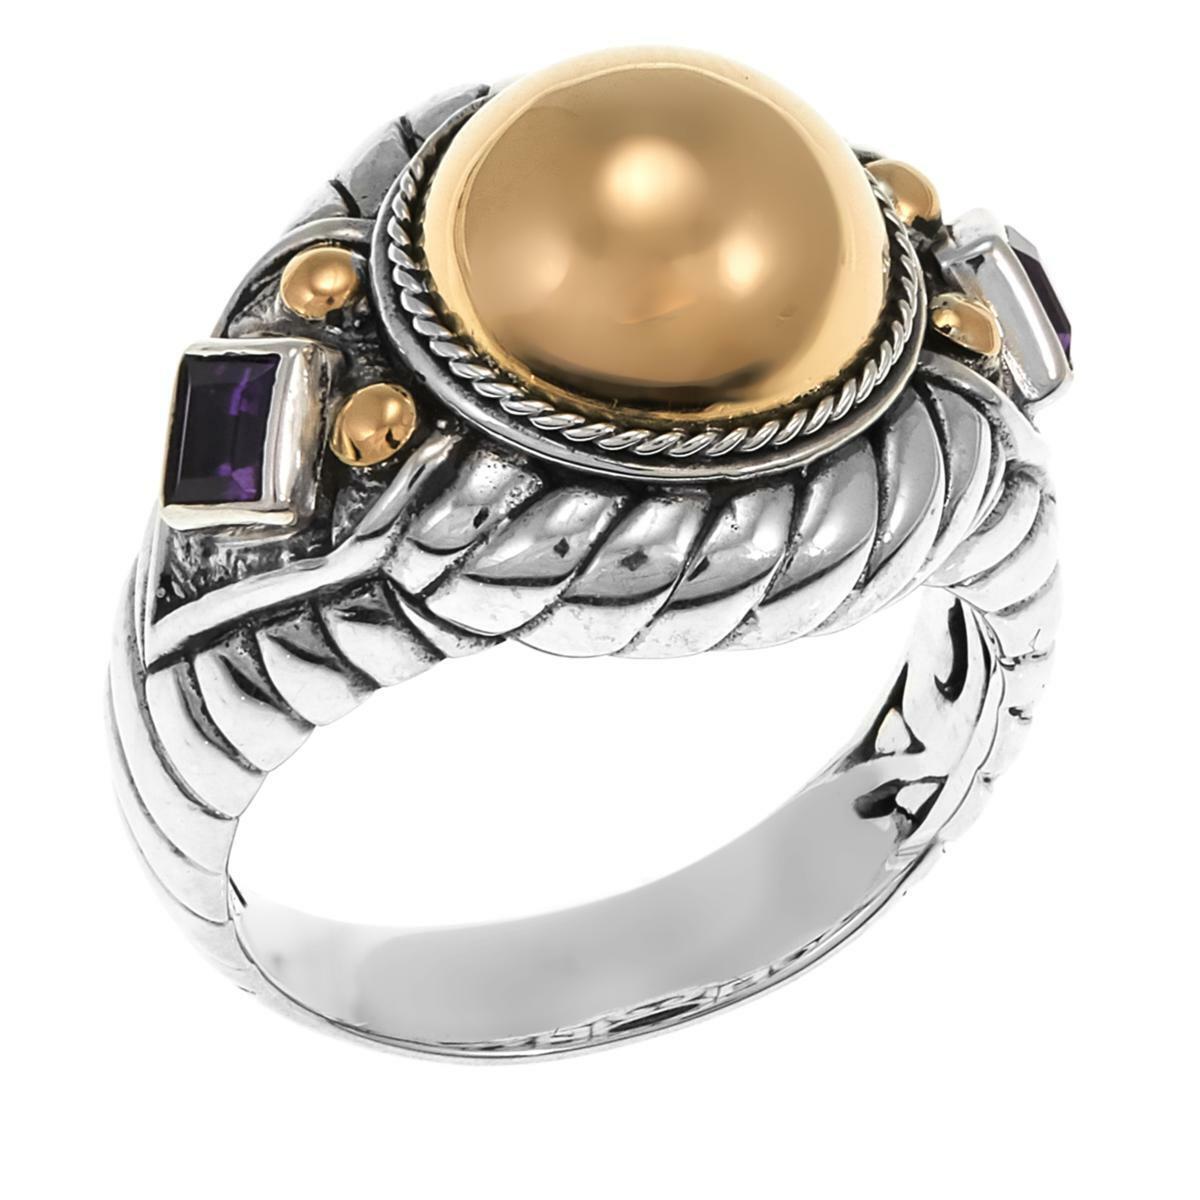 Bali Designs 2-Tone 0.22Ctw Amethyst Cable-Twist Ring Size 11 Hsn $221